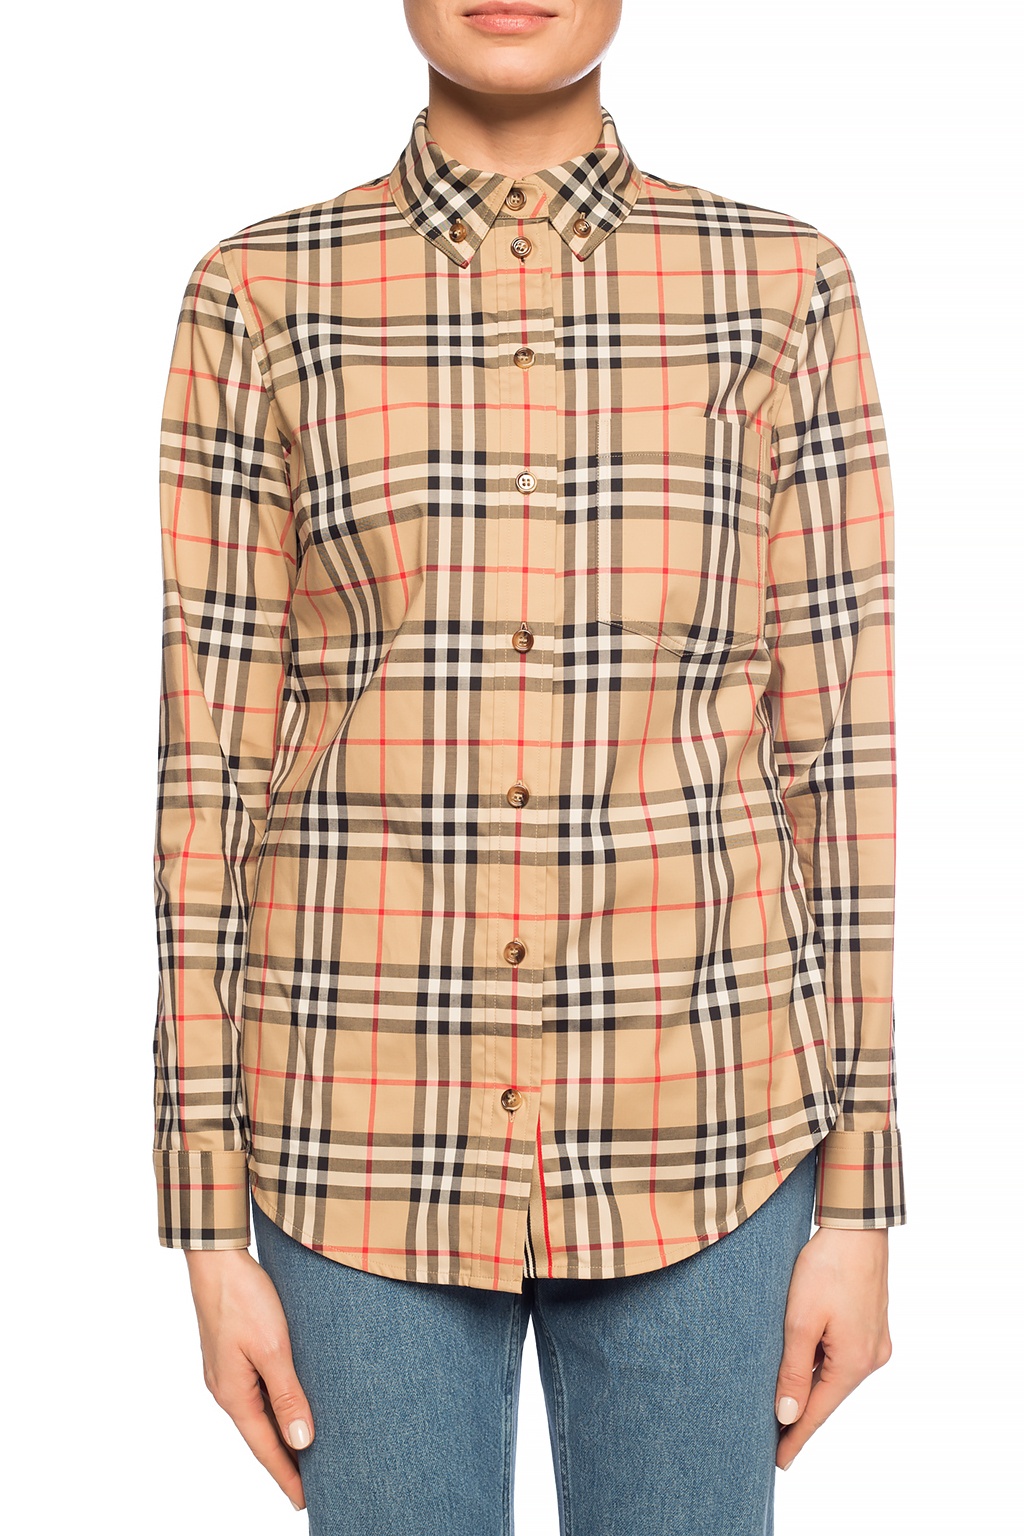 Burberry Shirts - How to Wear Burberry Shirts, Chictopia